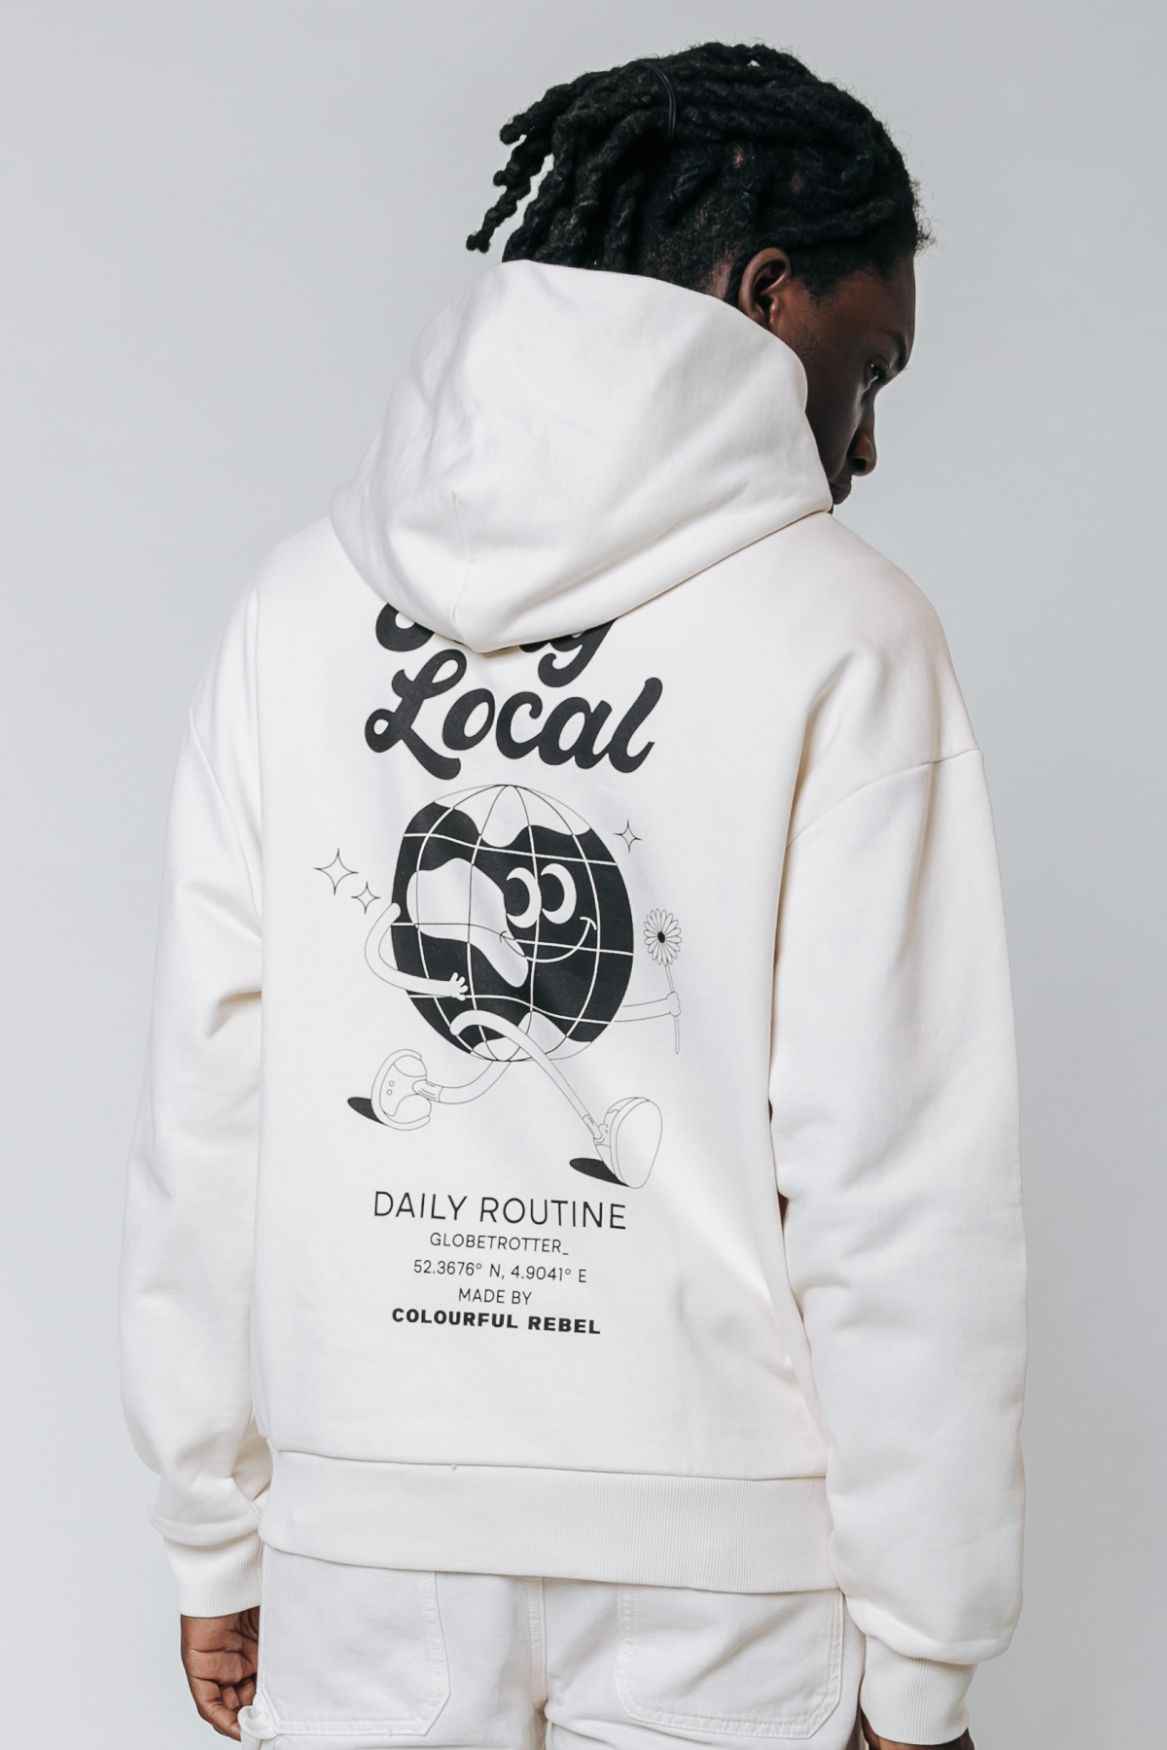 Colourful Rebel Stay Local Relaxed Clean Pkt Hoodie 301 light kit 00102913-EKA26011600000010